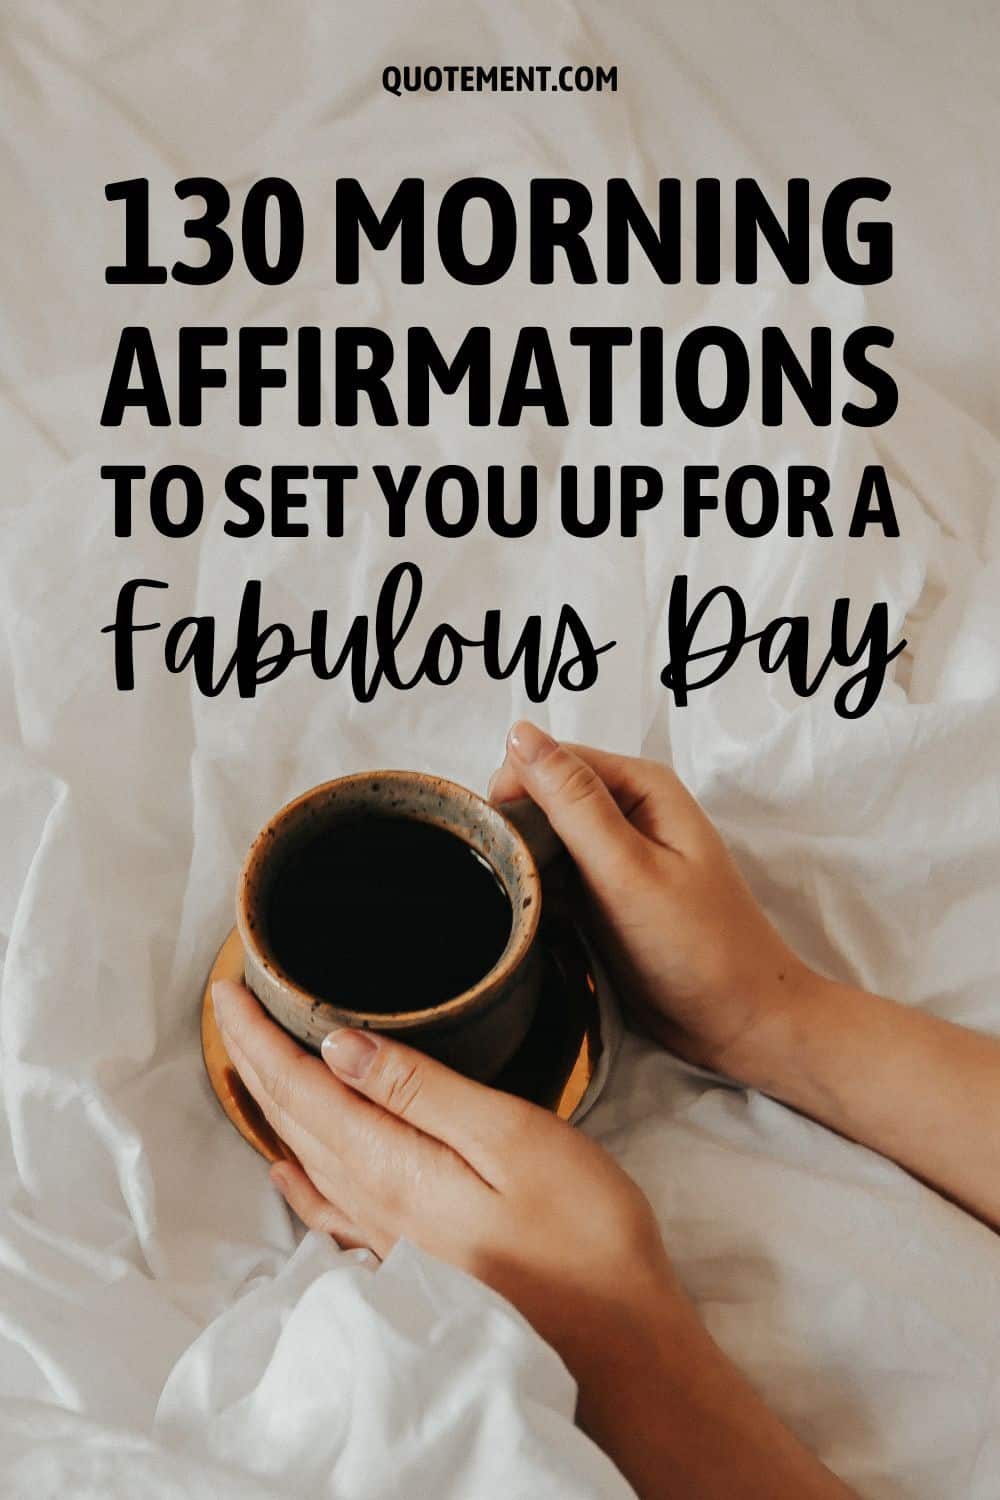 130 Morning Affirmations To Set You Up For A Fabulous Day
